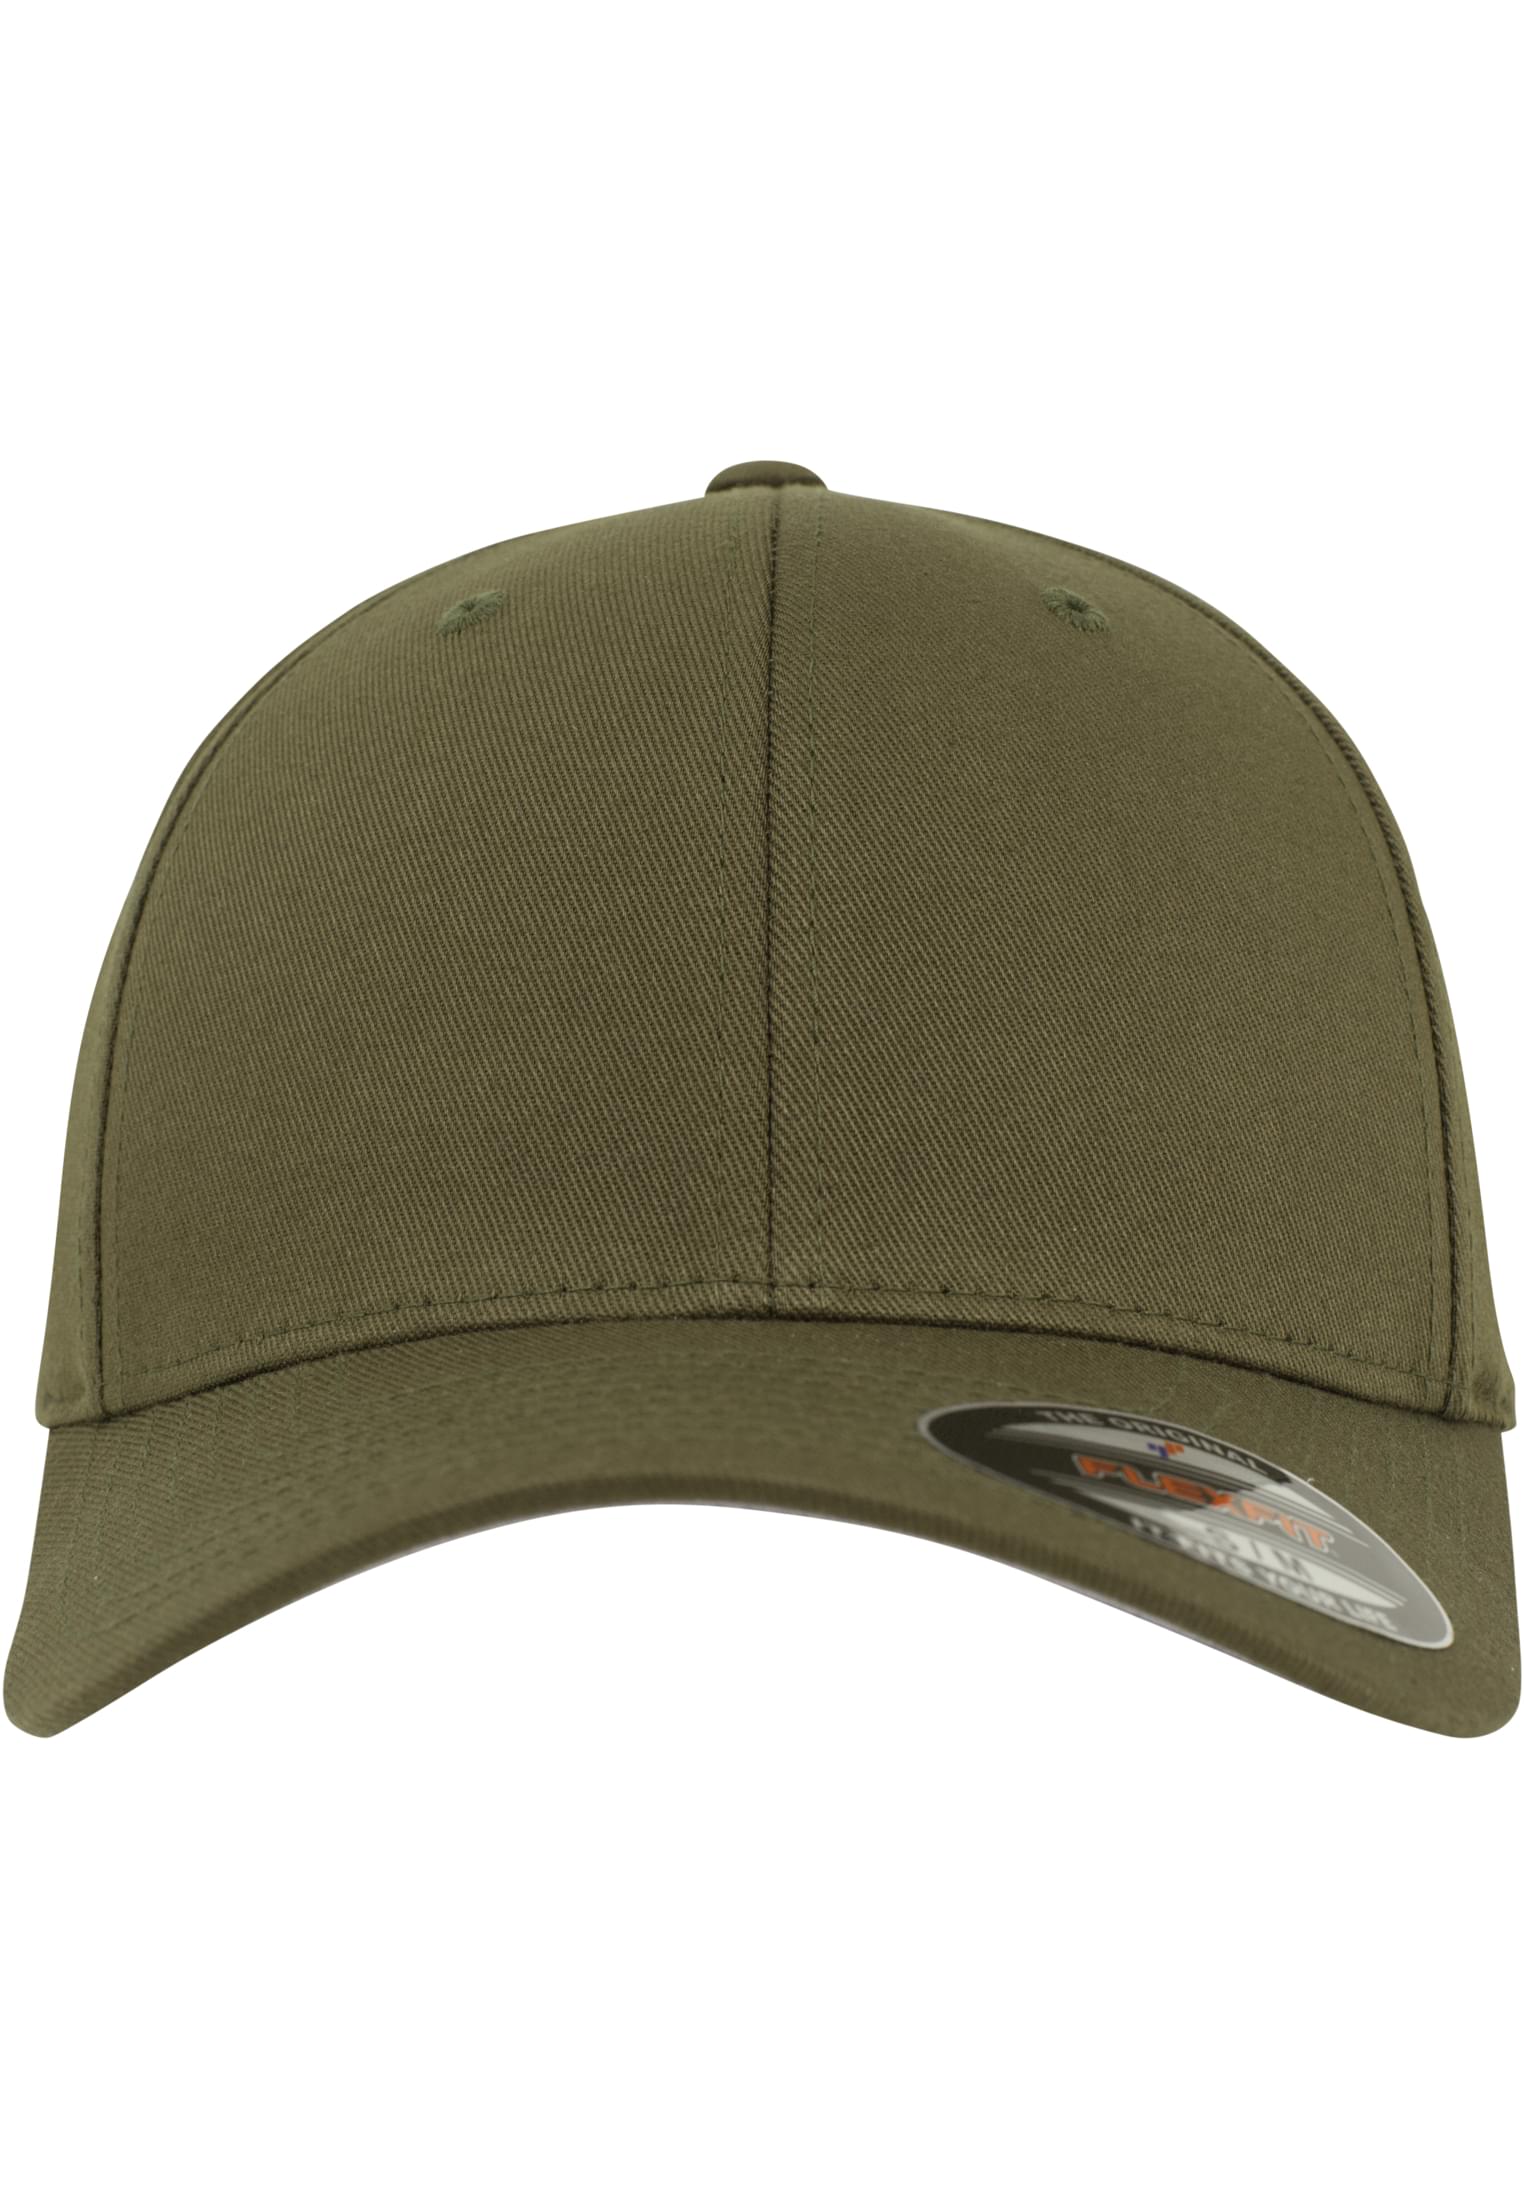  Fitted Baseball Cap in Farbe olive